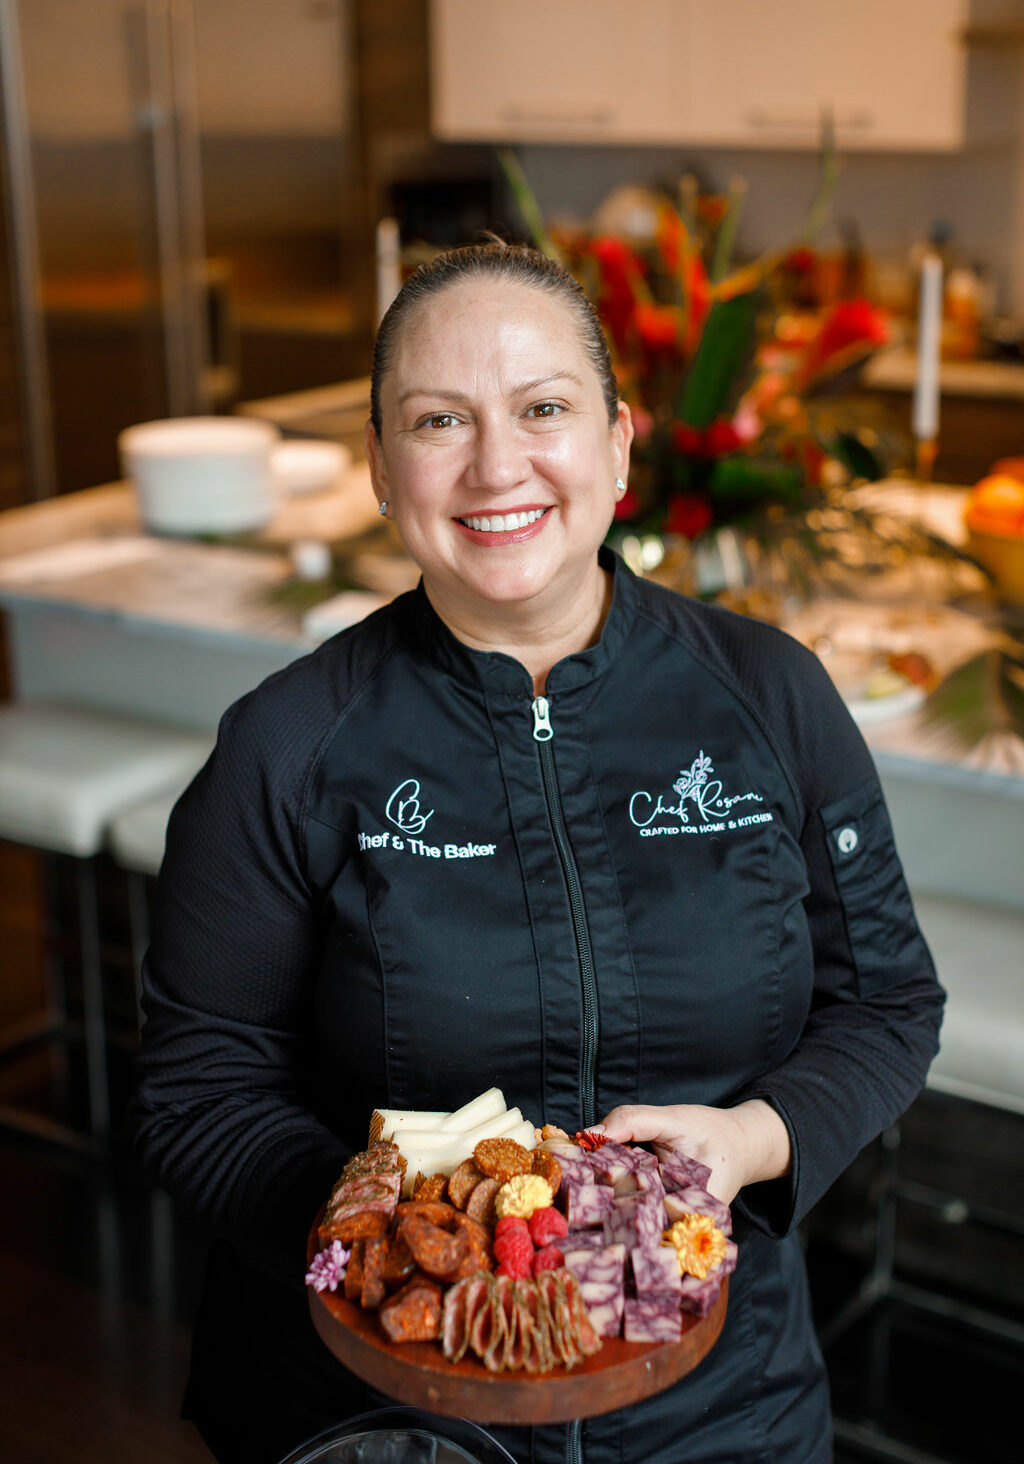 Chef Rosana standing in a kitchen smiling, holding food she has prepared